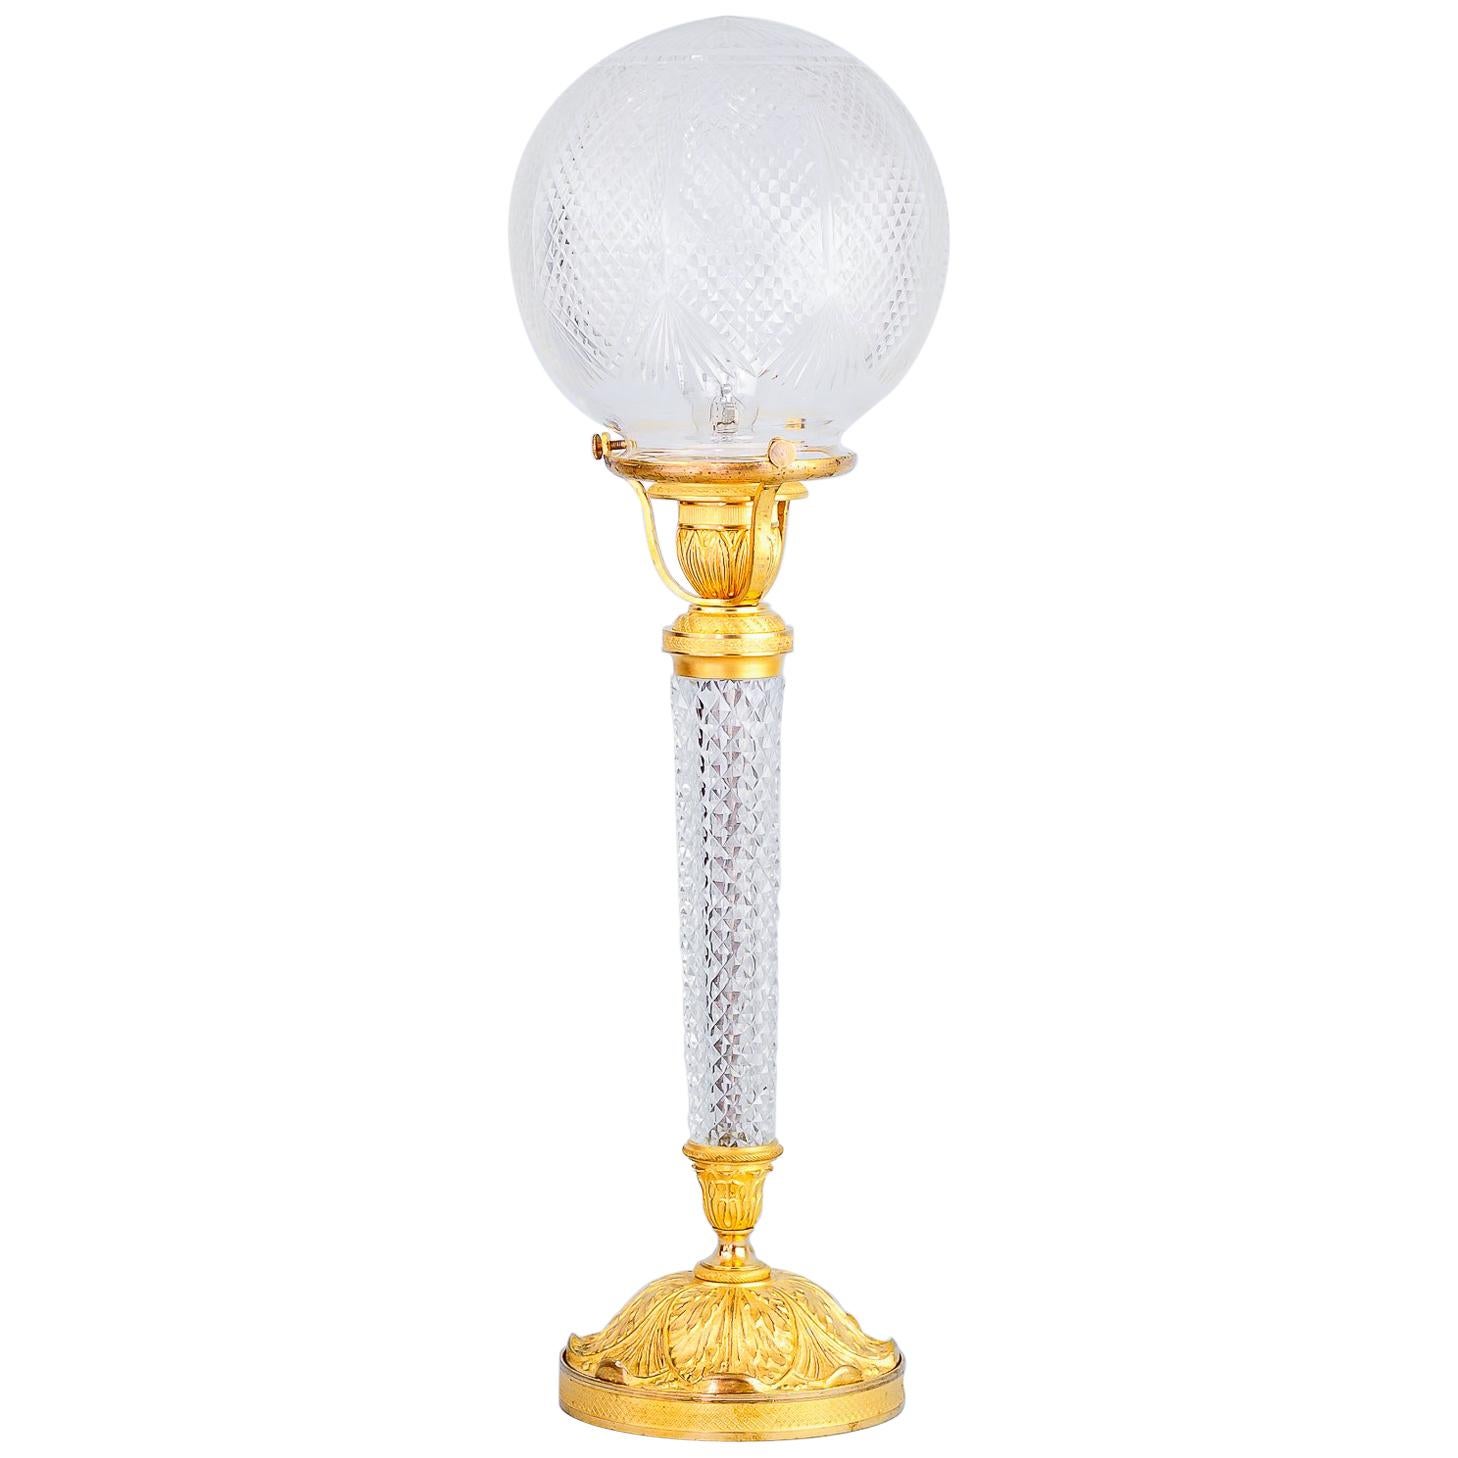 Gilted Historistic Table Lamp, circa 1890s with Original Glass Shade